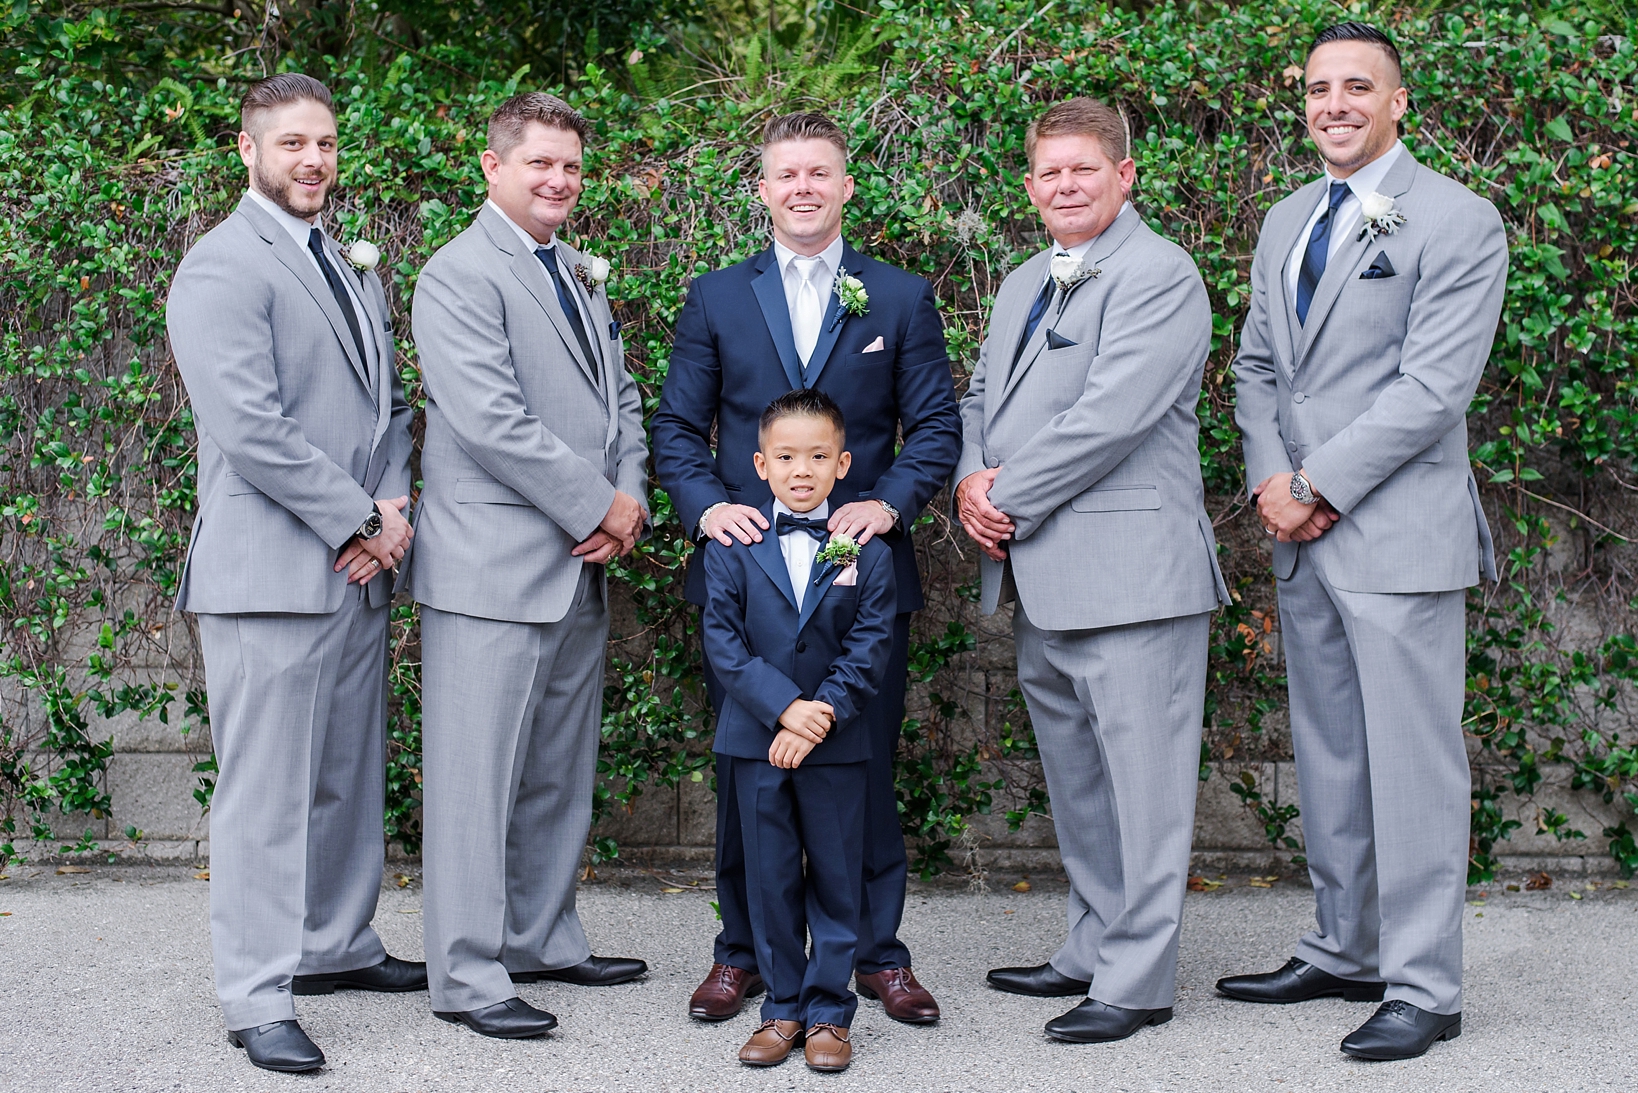 Groom and his son with Groomsmen at a wedding at the T. Pepin Hospitality Centre in Tampa, FL